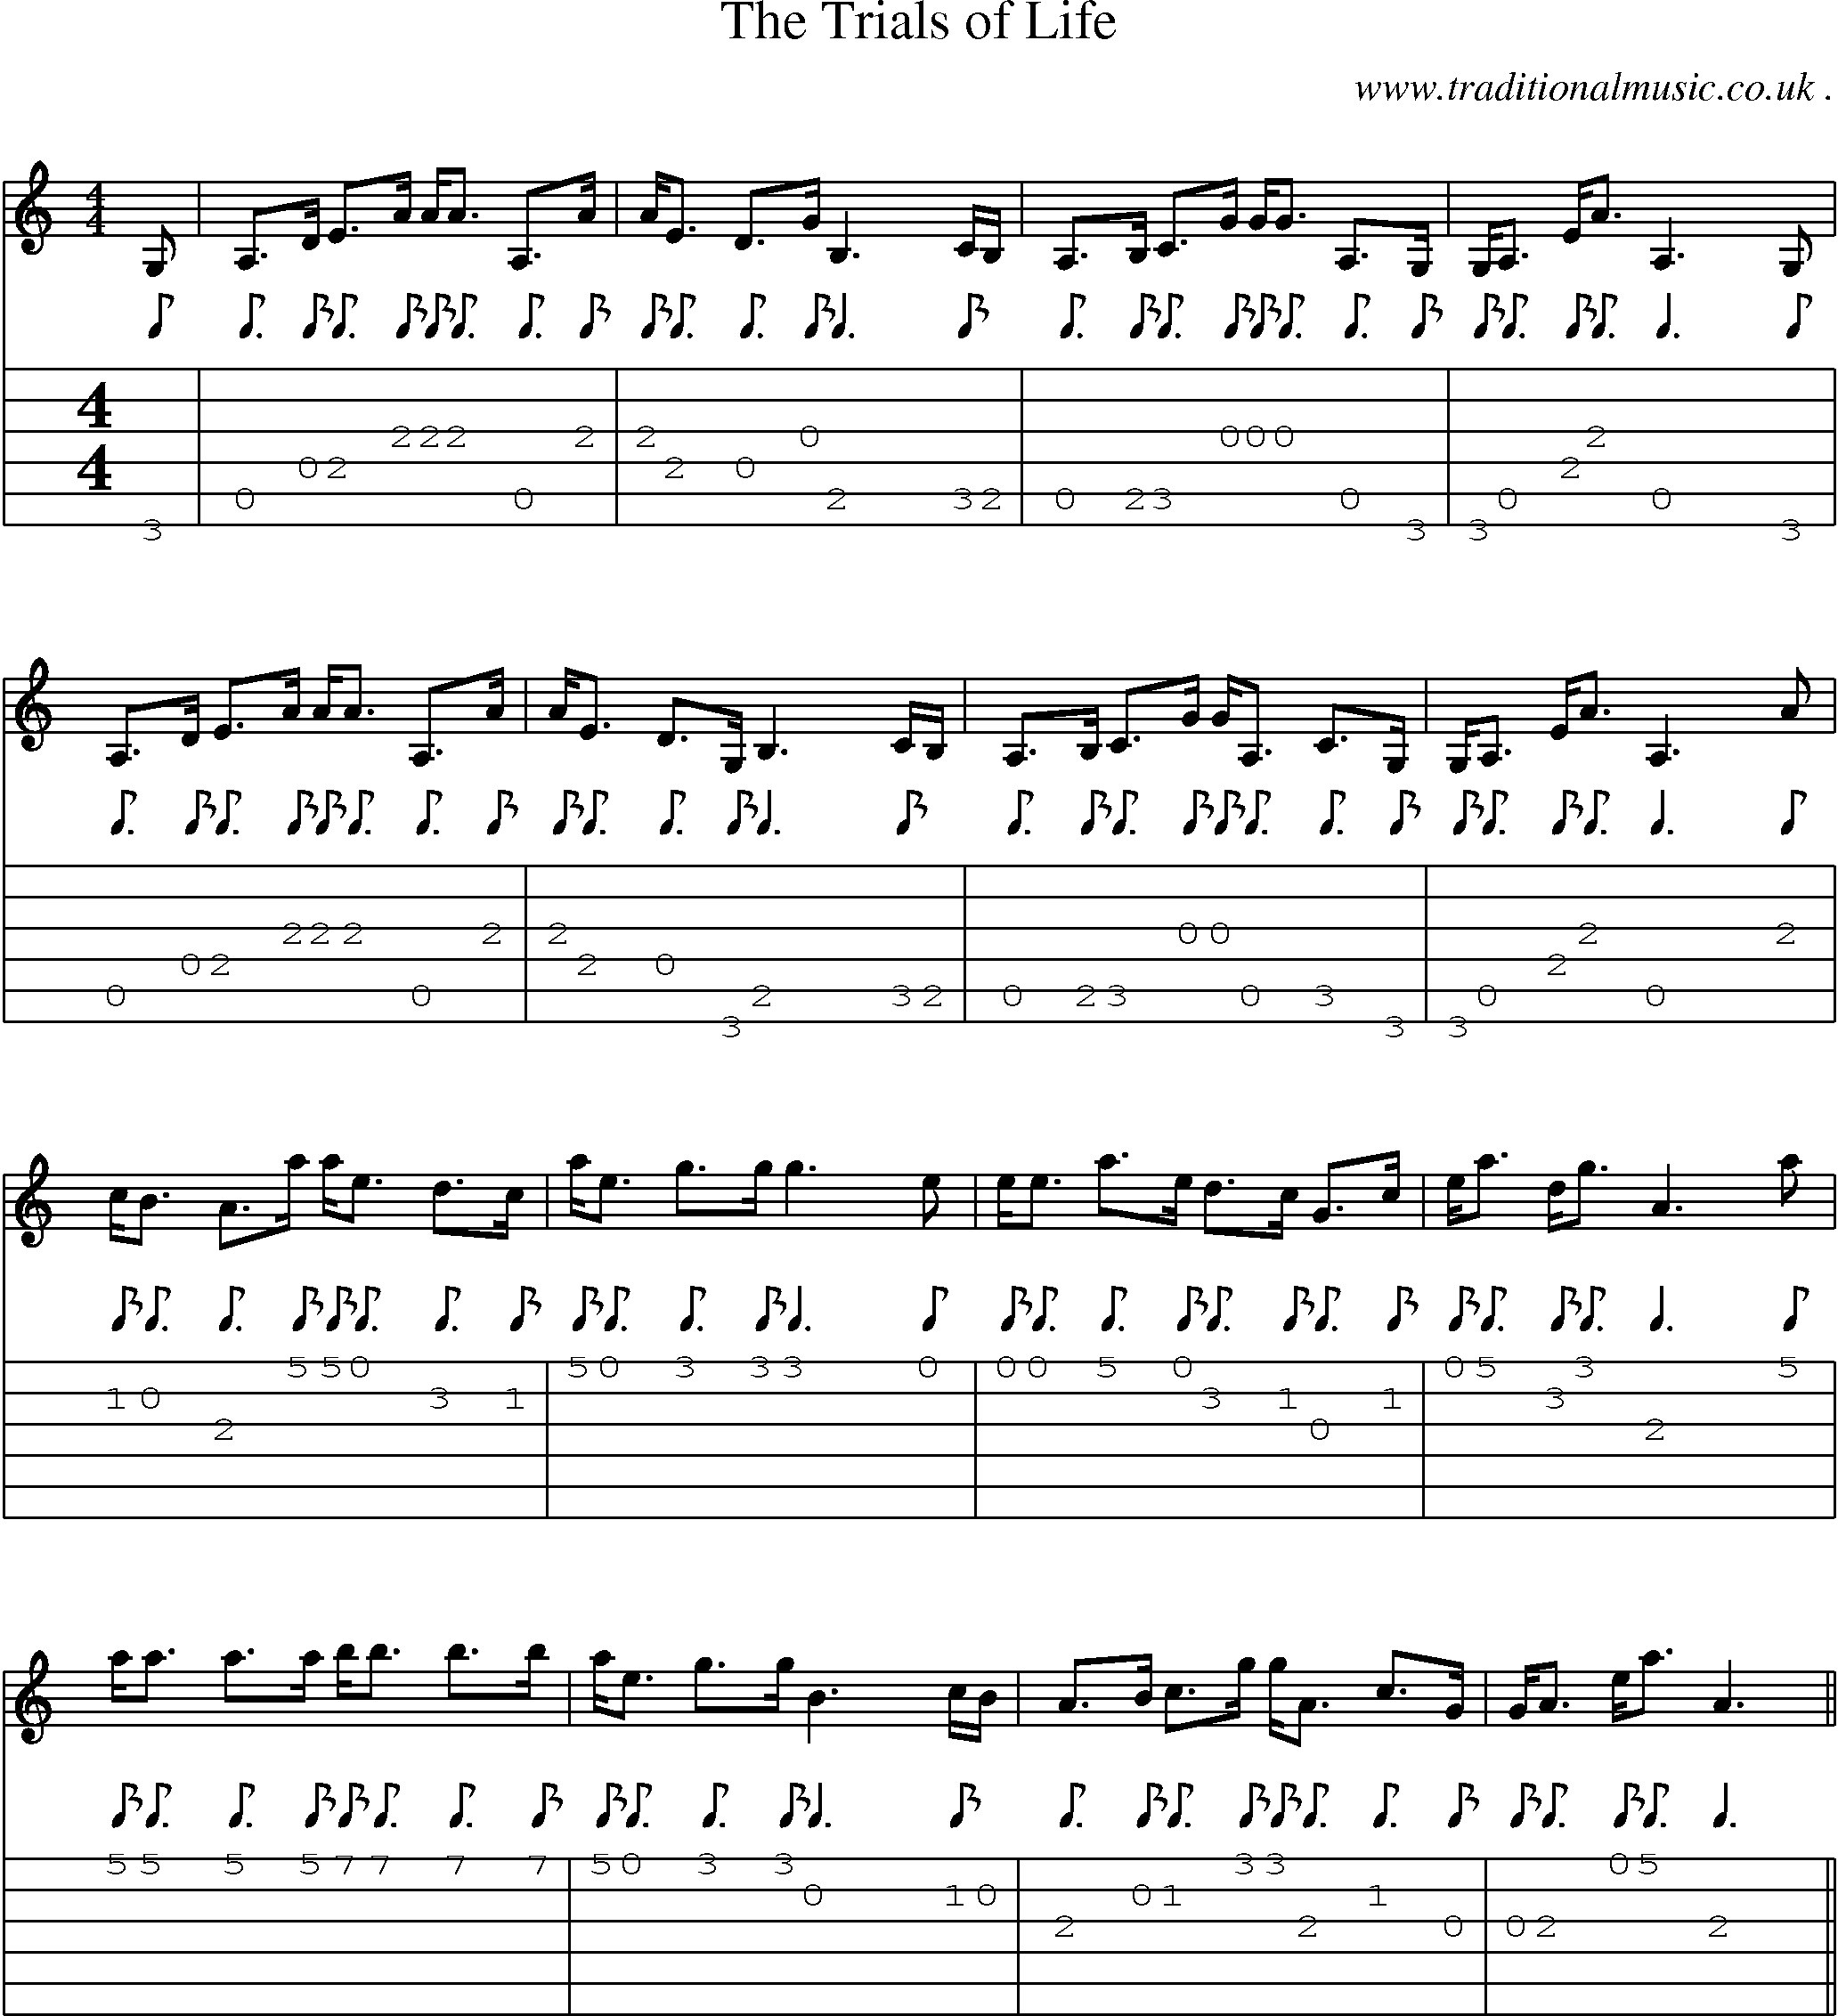 Sheet-music  score, Chords and Guitar Tabs for The Trials Of Life